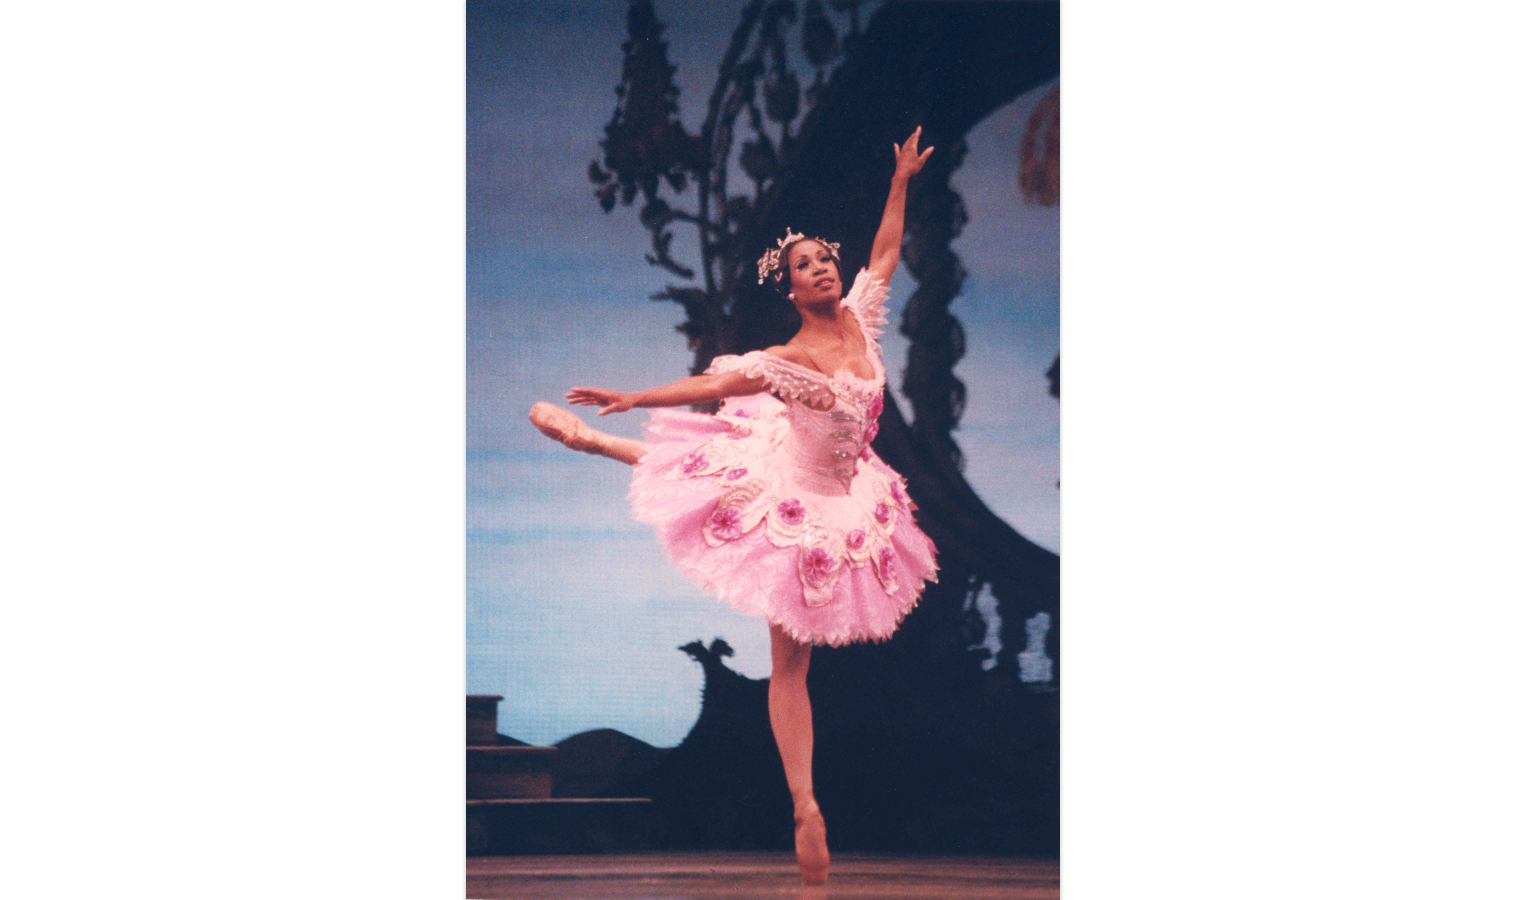 A vintage performance photo of Lauren Anderson as the Sugarplum Fairy. She is wearing a pink tutu and pointe shoes and balancing in attitude.